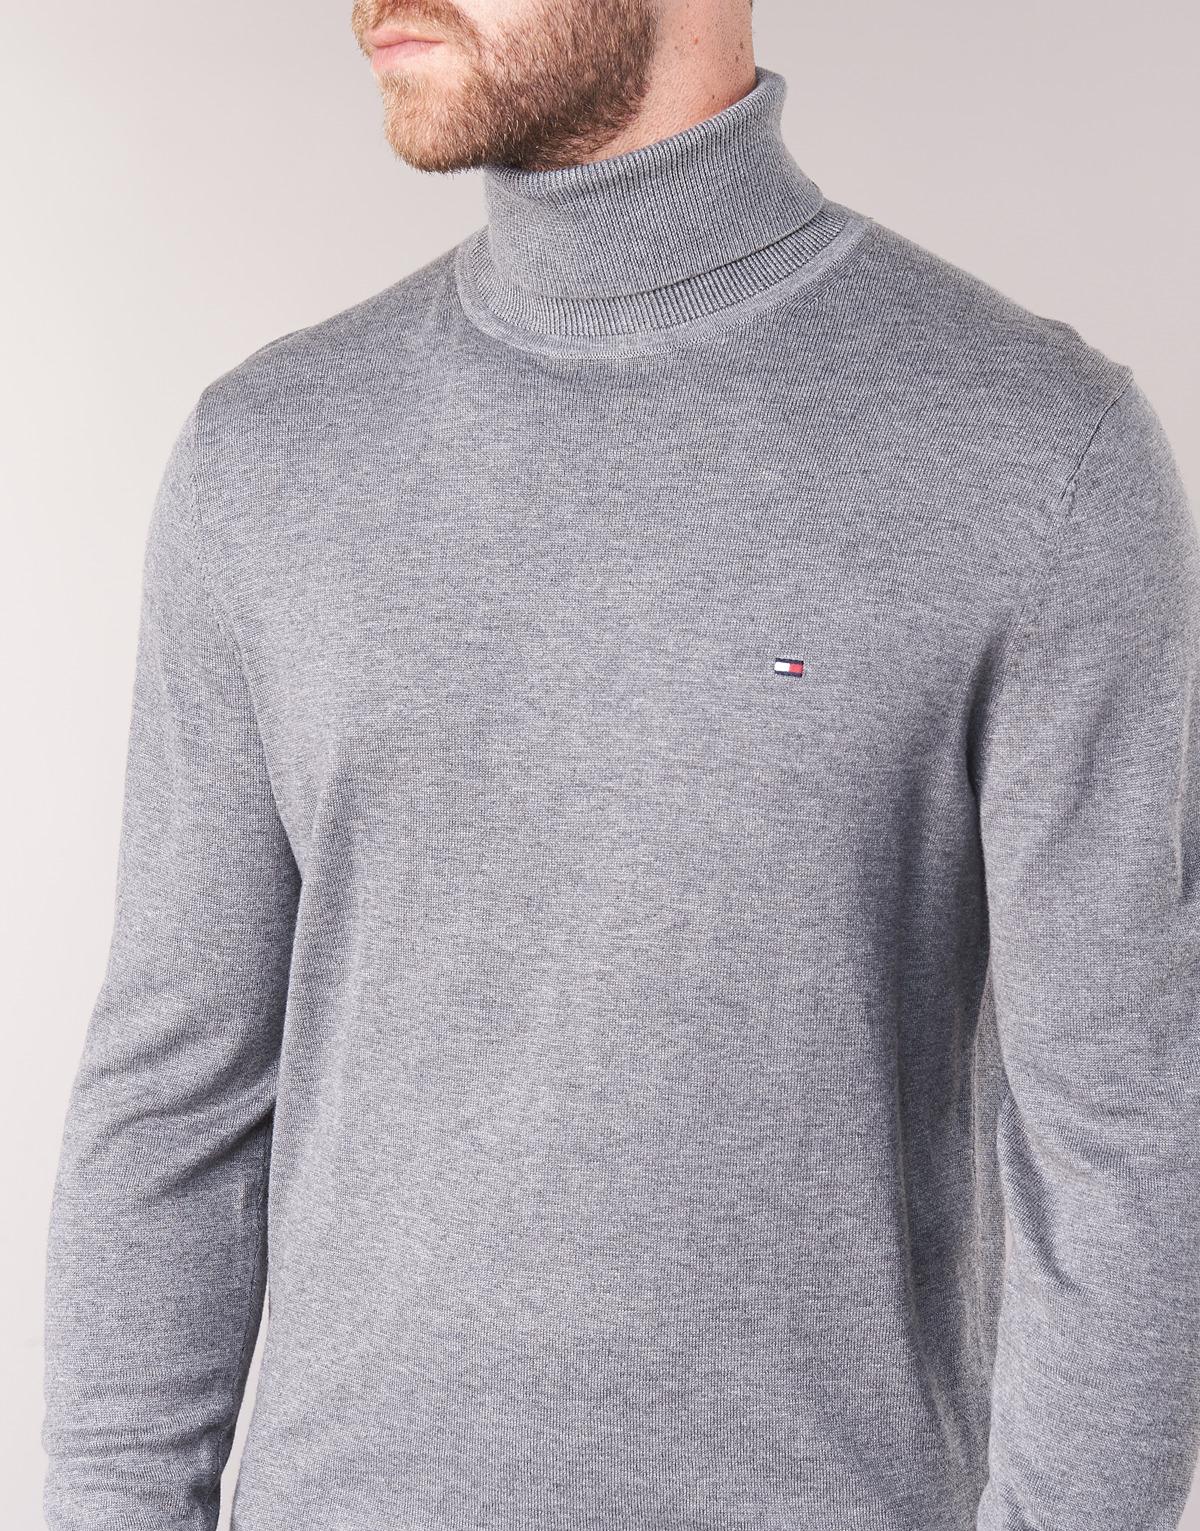 tommy hilfiger roll neck Cheaper Than Retail Price> Buy Clothing,  Accessories and lifestyle products for women & men -